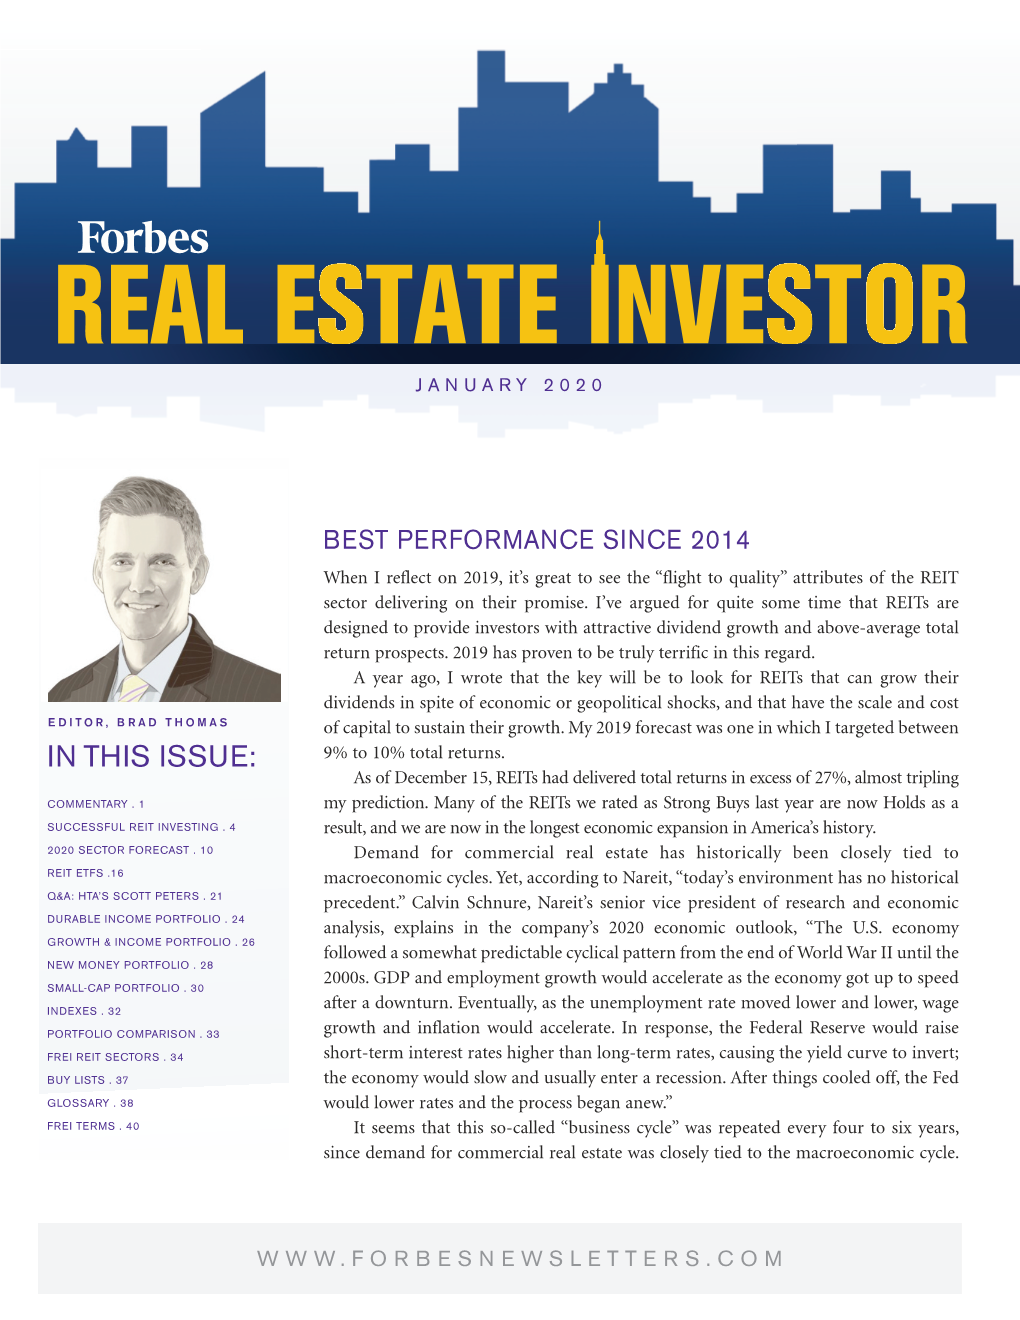 IN THIS ISSUE: 9% to 10% Total Returns